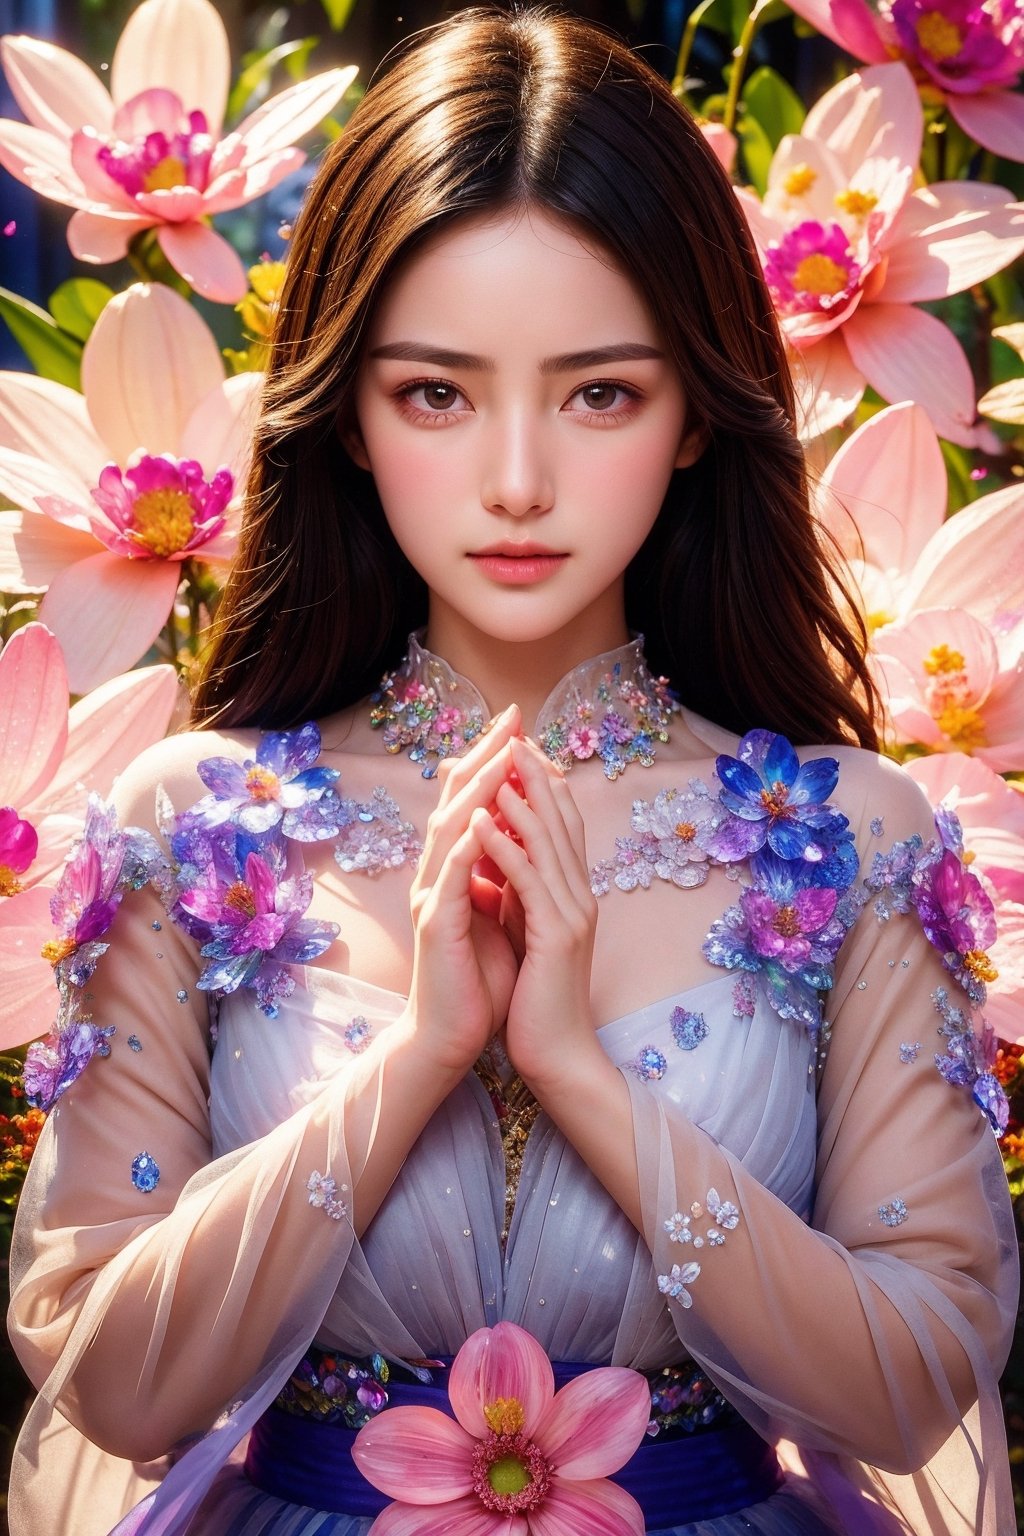 1girl, closed mouth, grey eyes, lips, long hair, long sleeves, looking at viewer, flower, extremely high quality high detail RAW color photo, crystal flower, intricate crystal patterns, translucent petals, prismatic light refraction, sharp, precise edges, detailed textures, luminous glow,